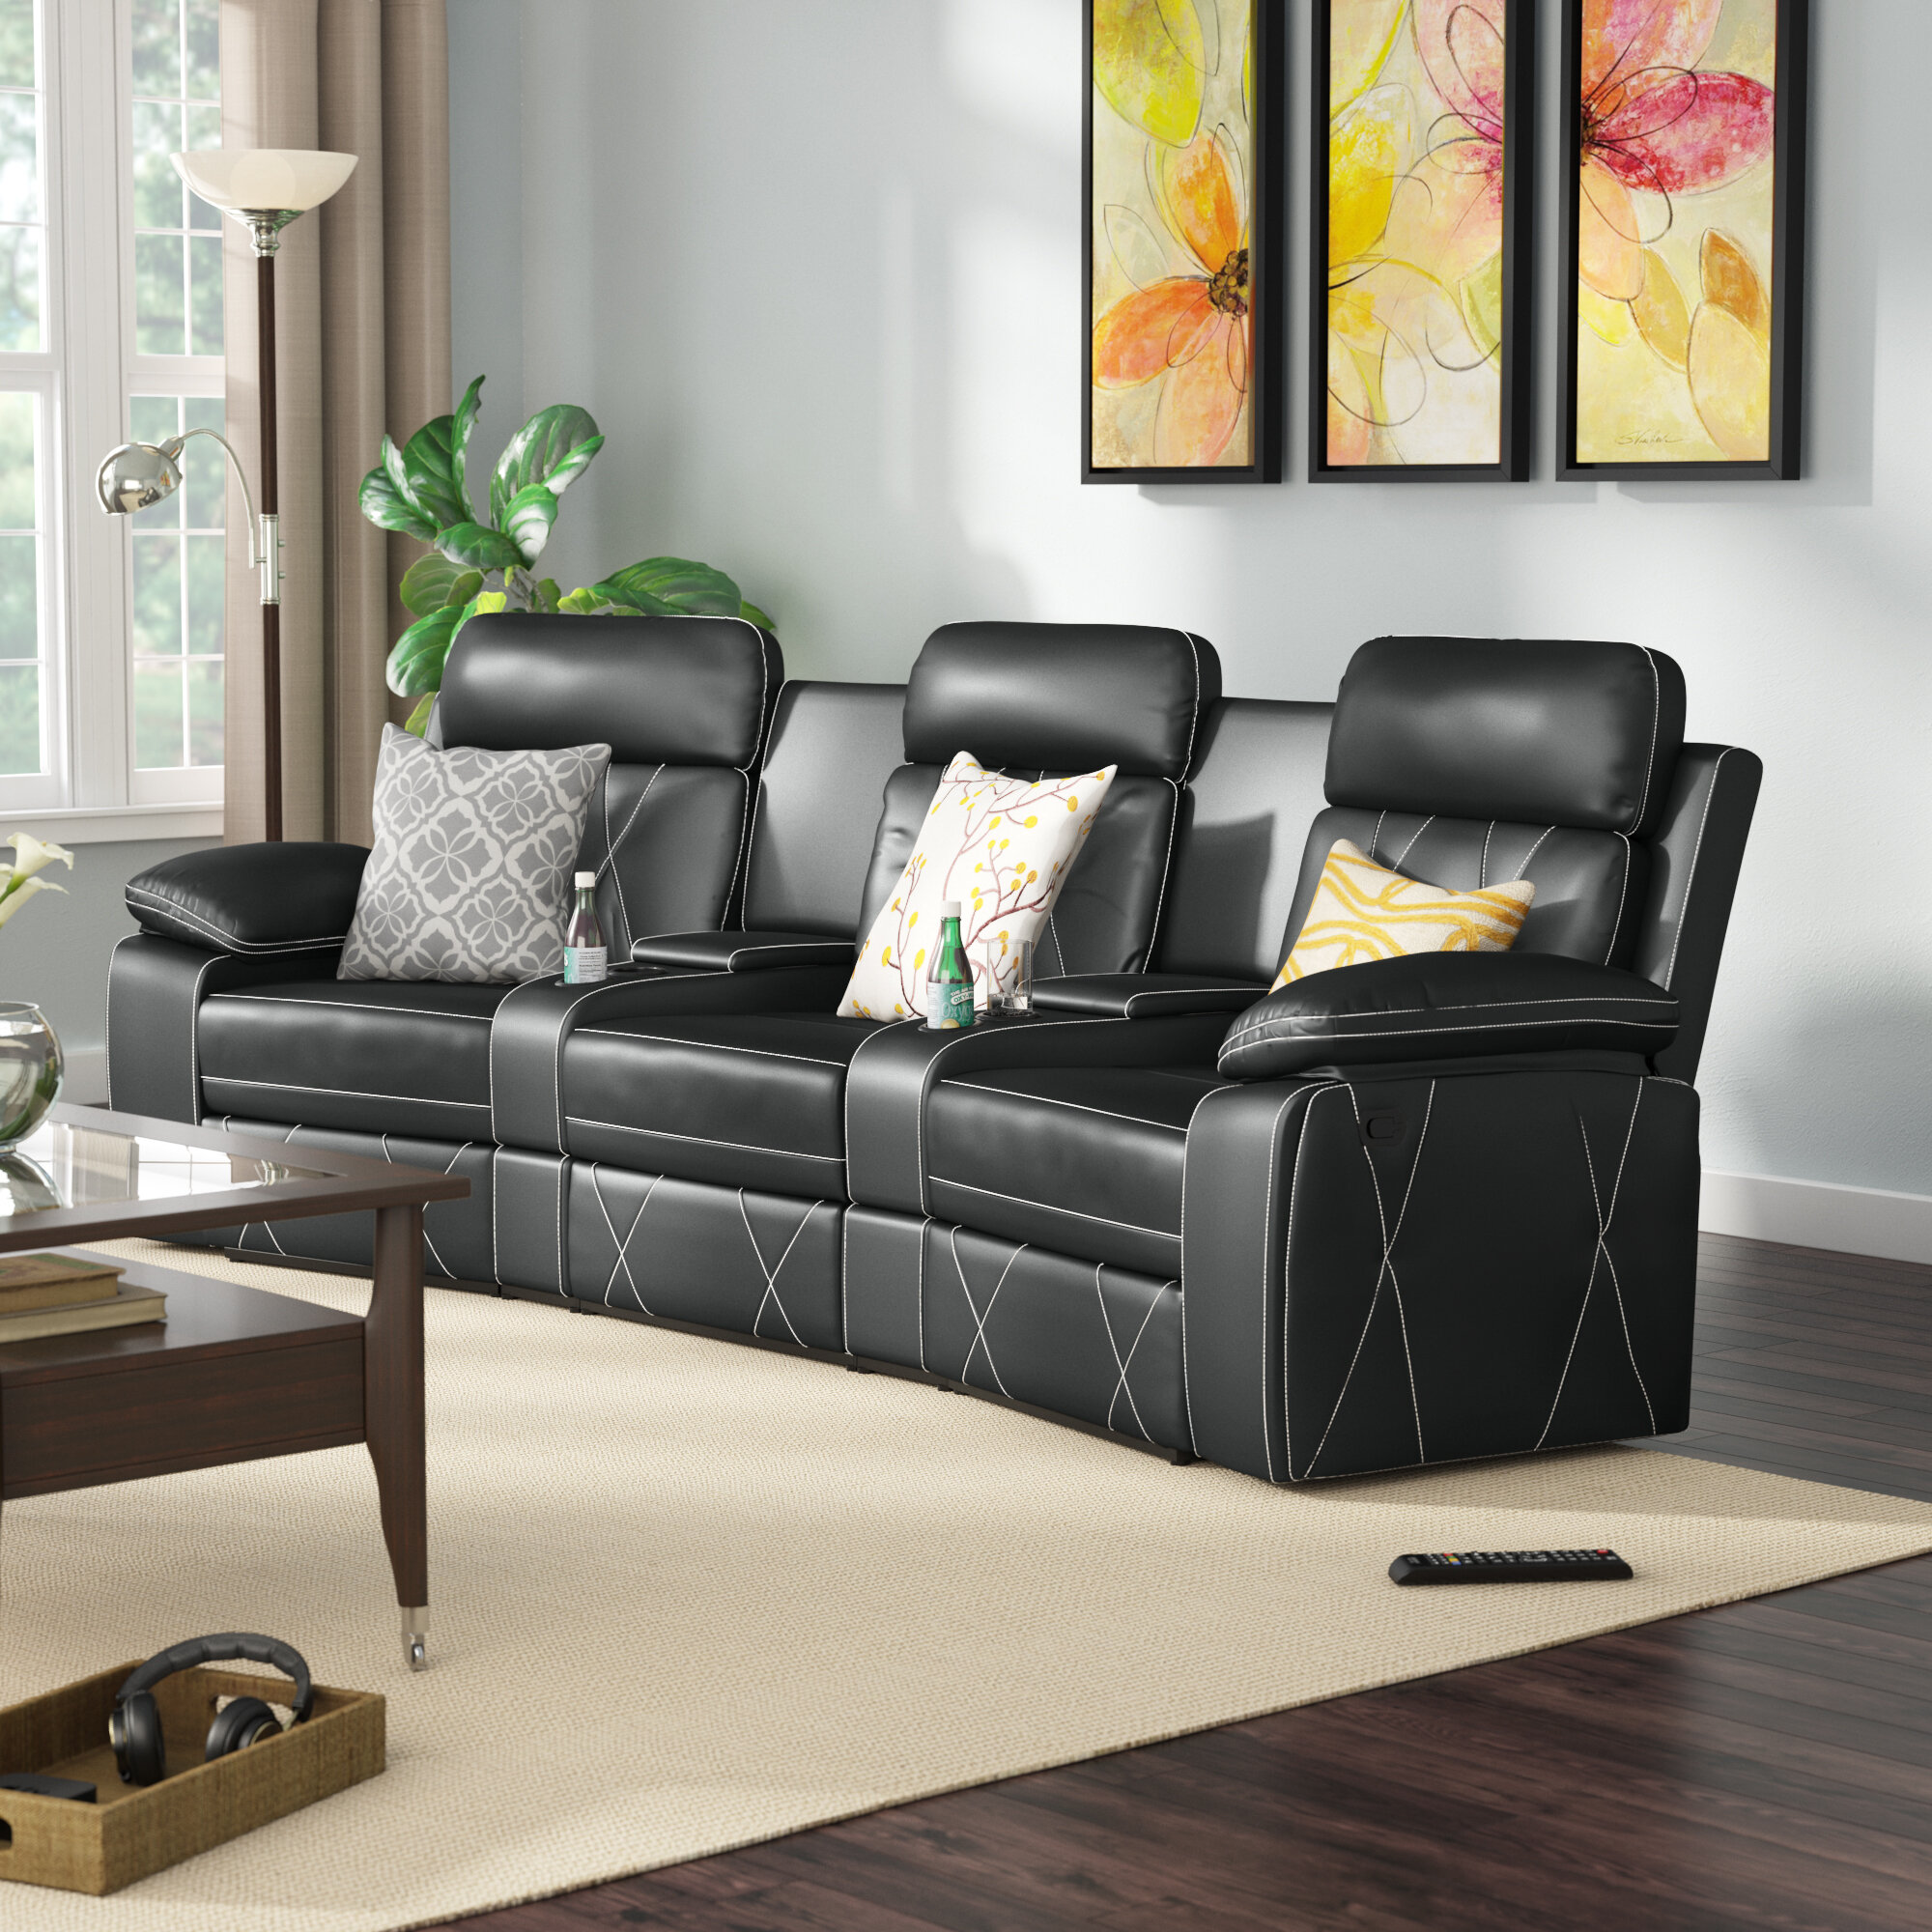 Black Modern Genuine Real Leather Sofa Chaise Sectional Home Theater Seat New 